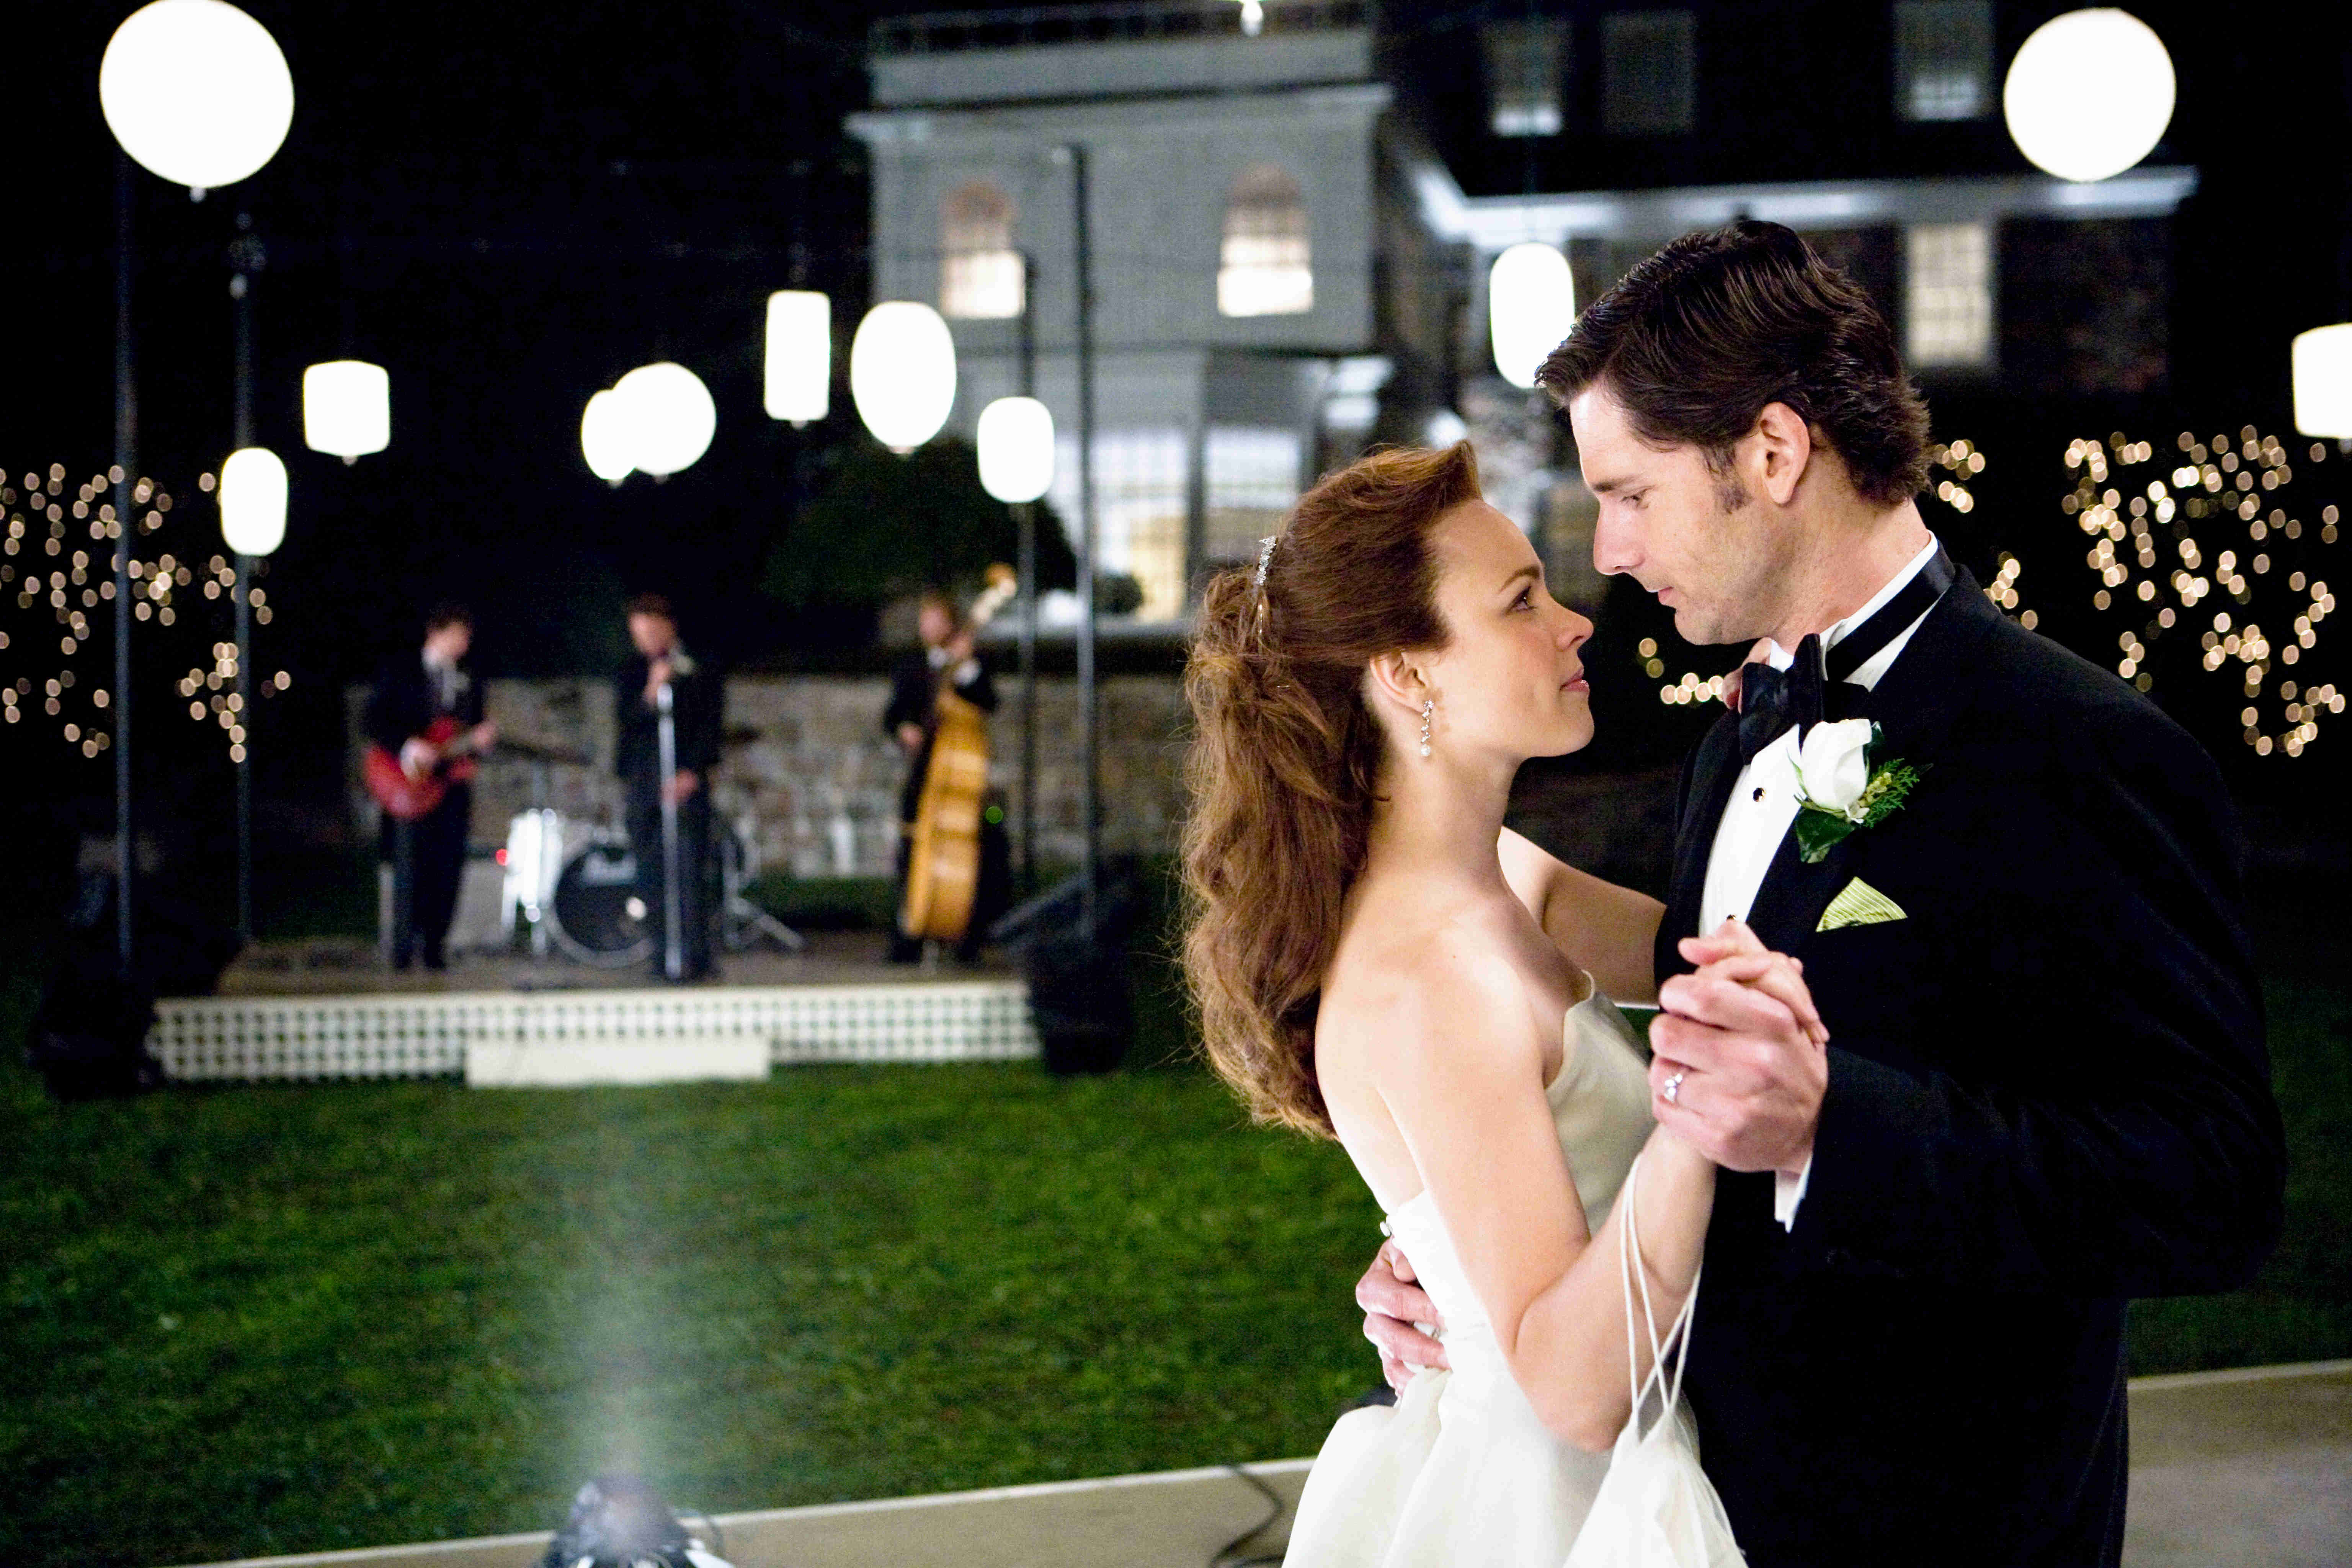 Rachel McAdams stars as Clare Abshire and Eric Bana stars as Henry DeTamble in New Line Cinema's The Time Traveler's Wife (2009). Photo credit by Alan Markfield.